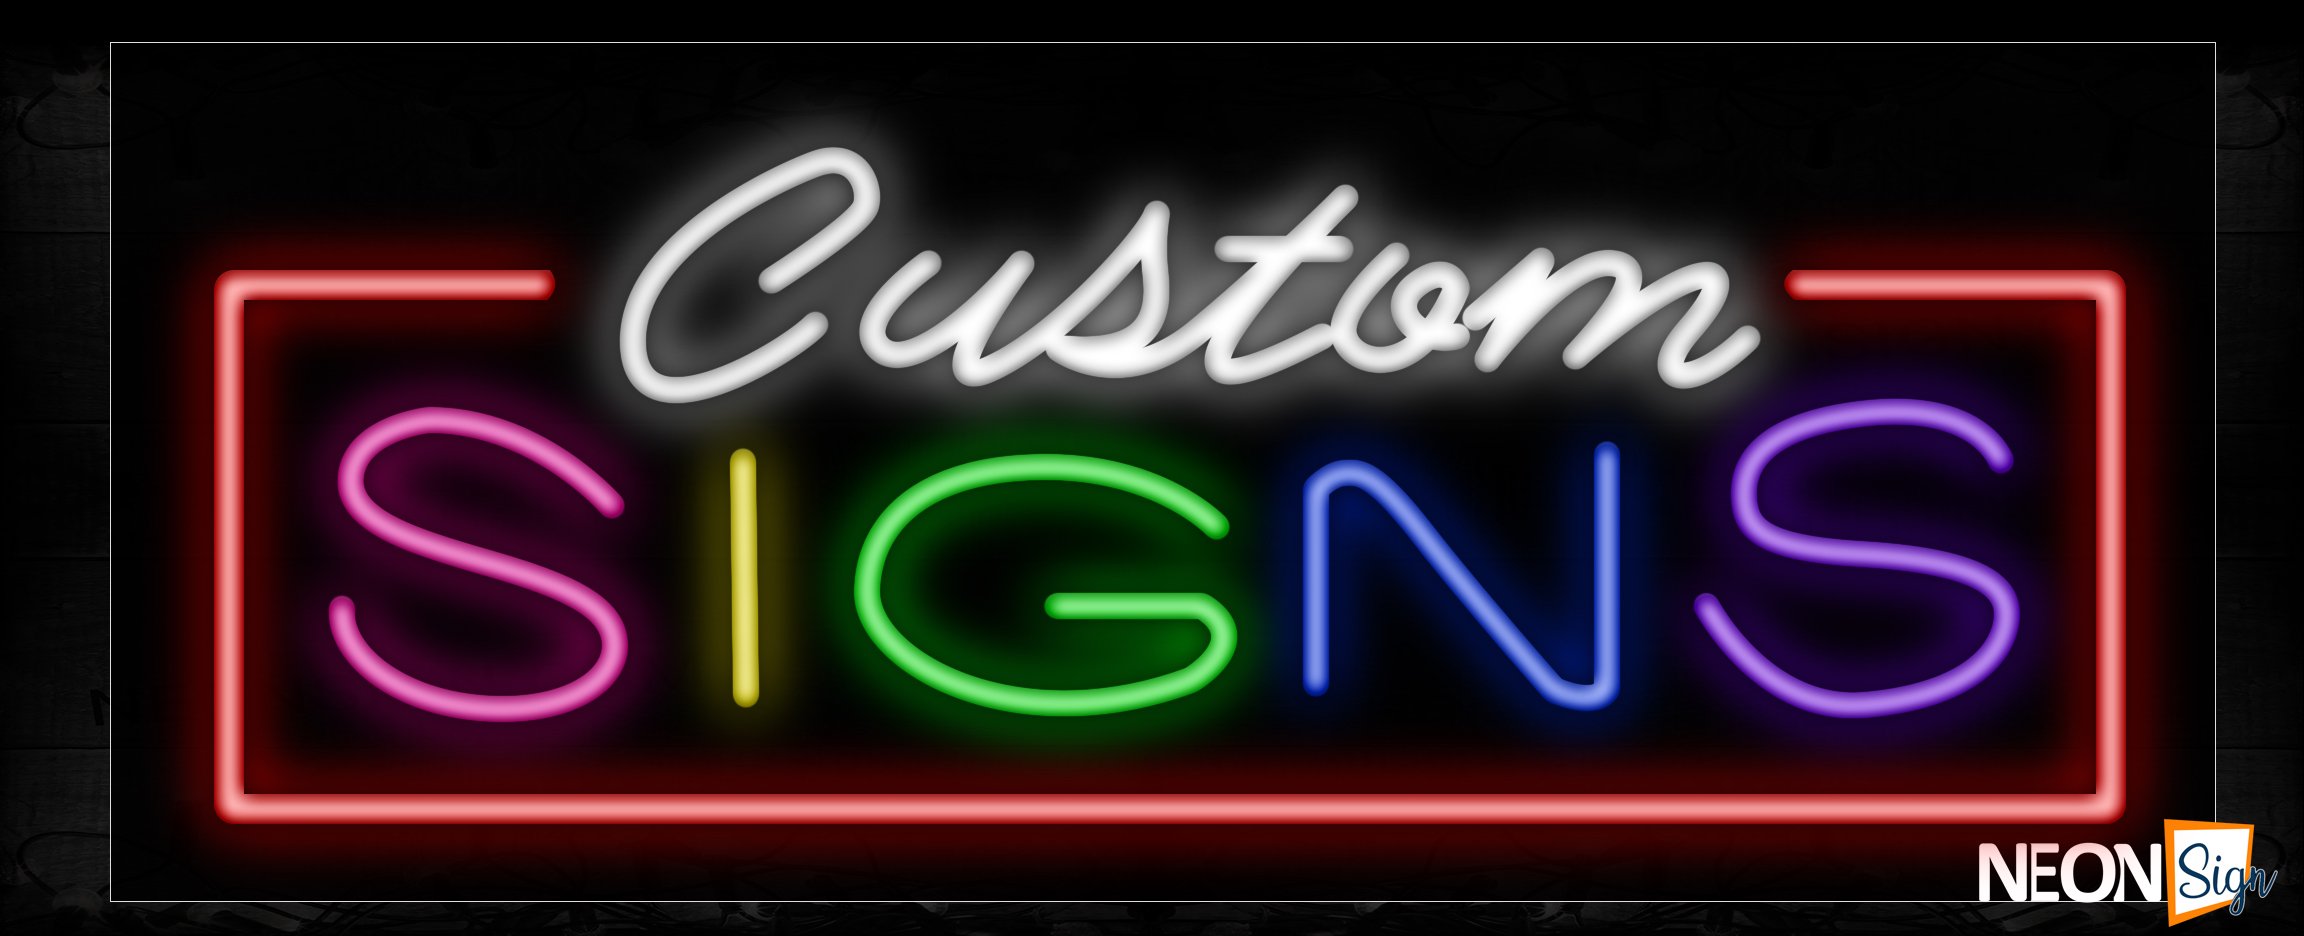 Image of 10719 Custom Signs with red border Neon Sign_13x32 Black Backing